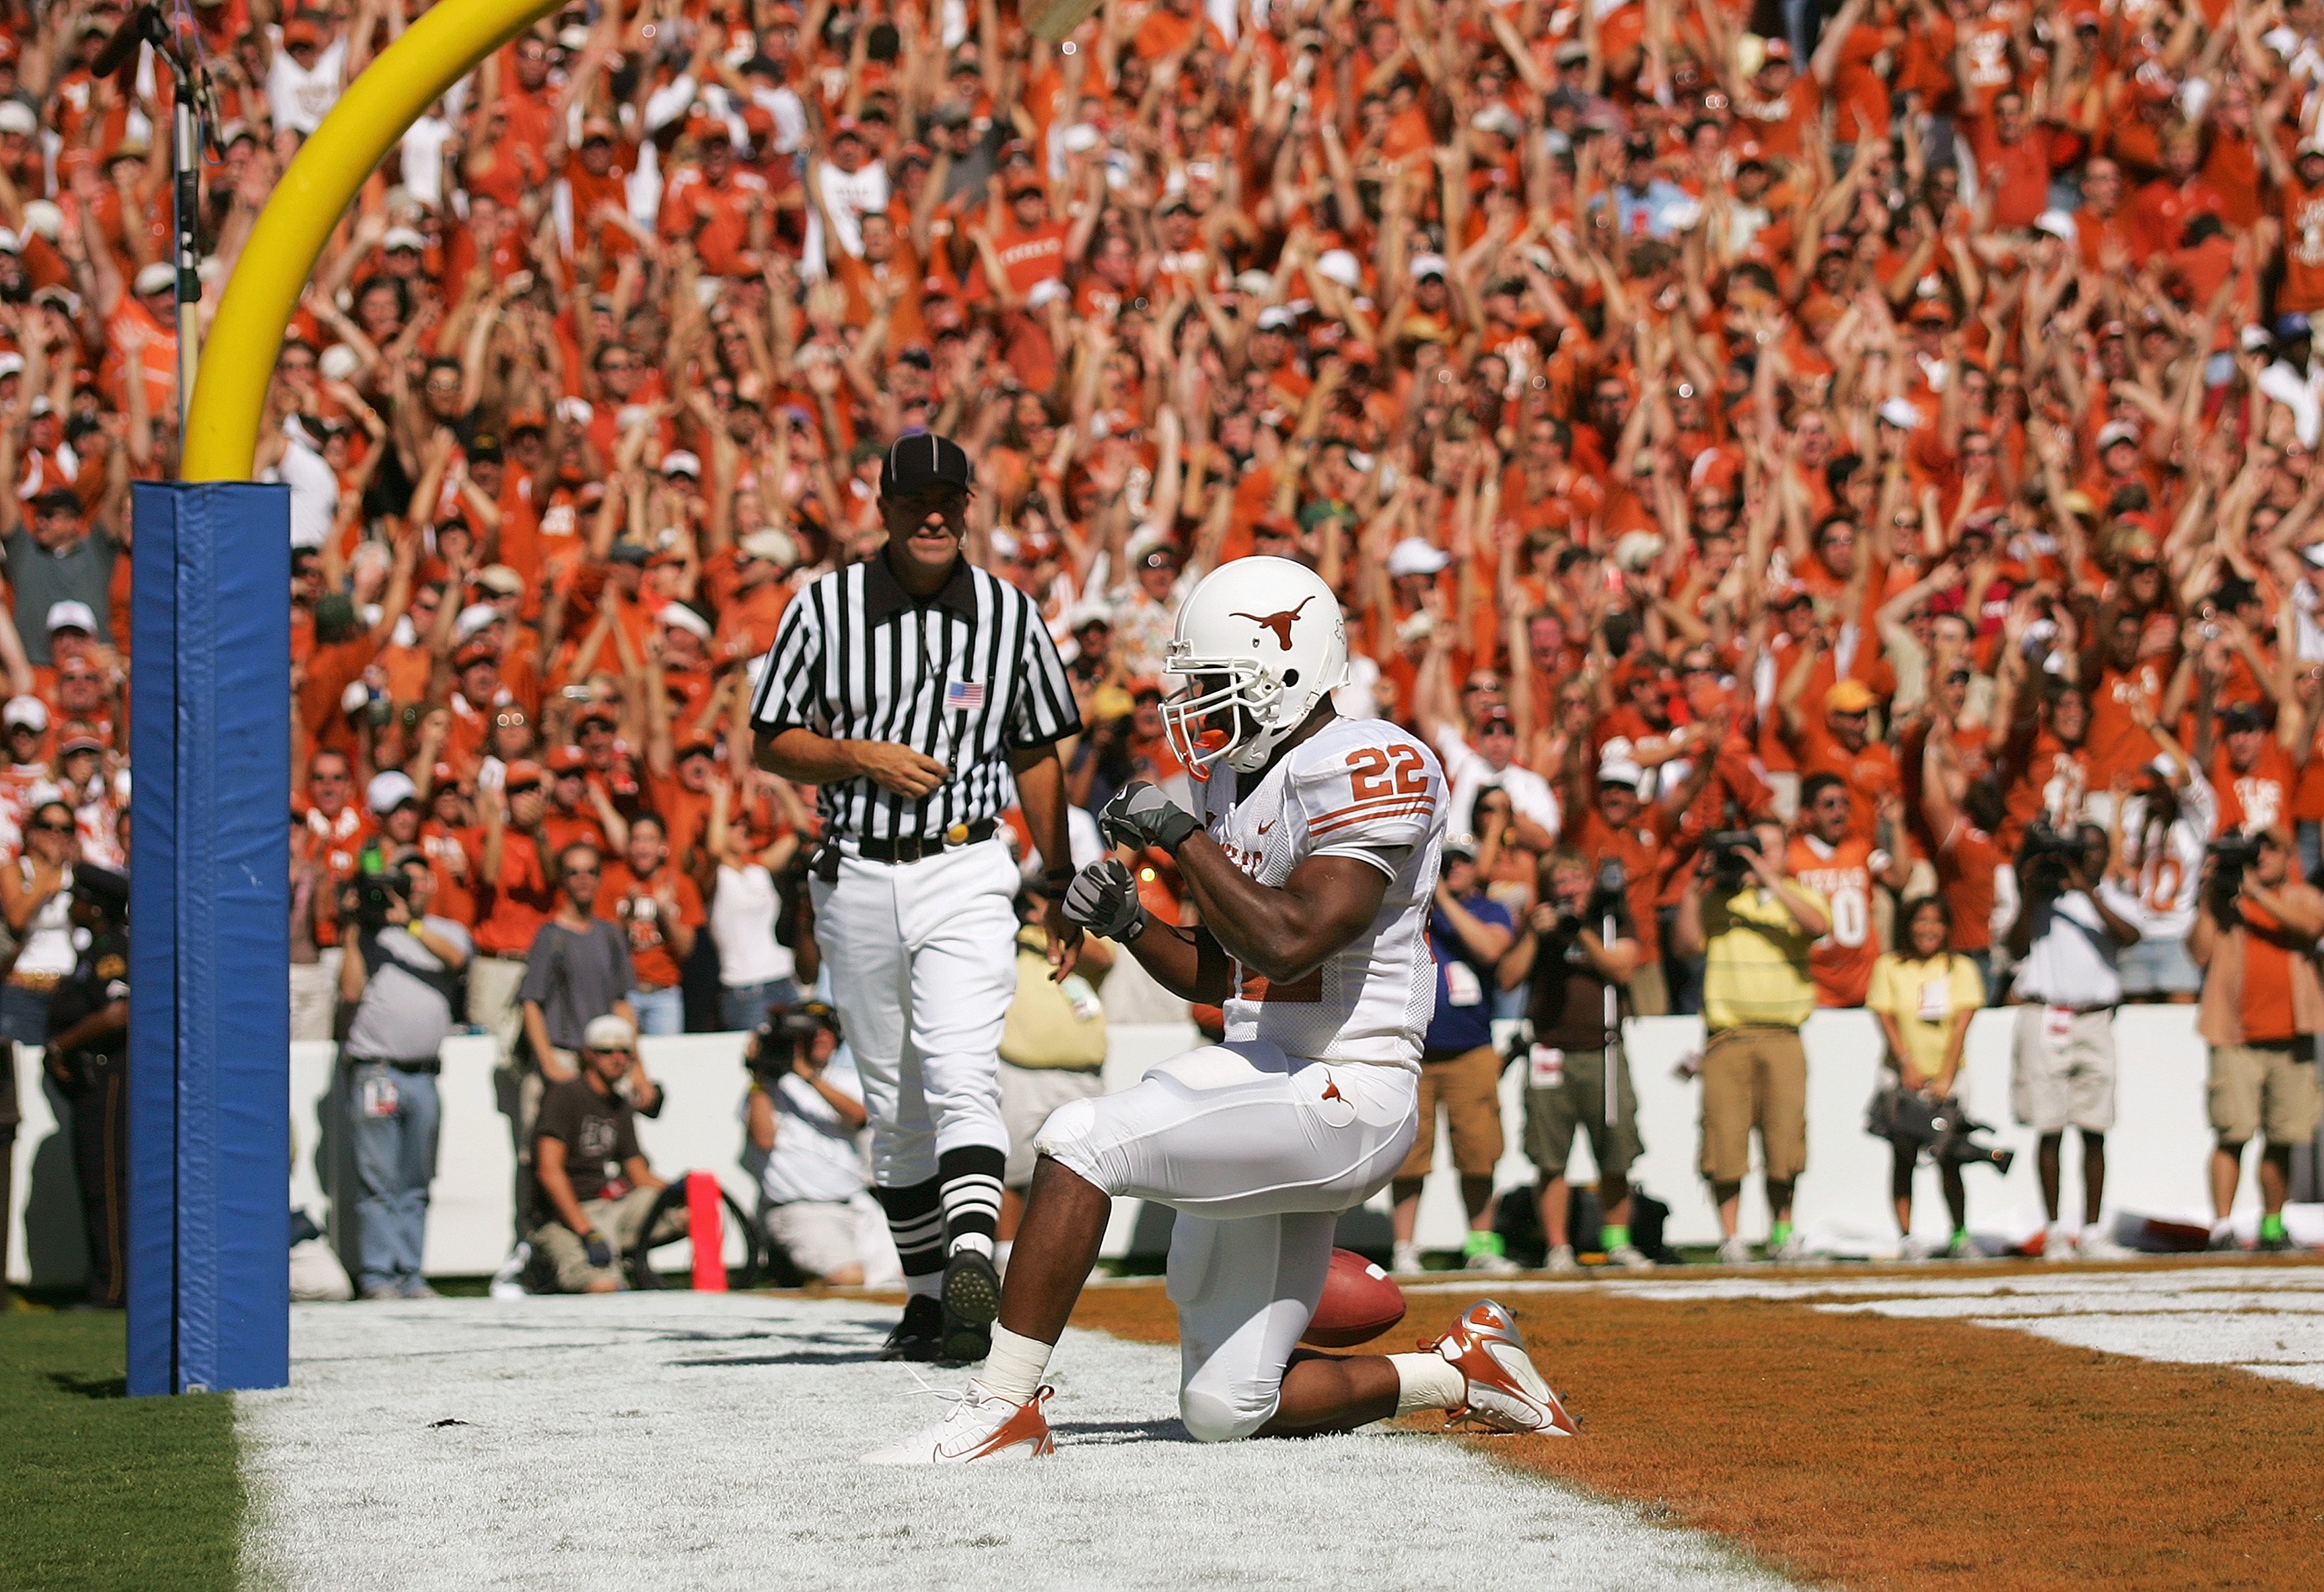 DALLAS - OCTOBER 7:  Running back Selvin Young #22 of the Texas Longhorns kneels in the endzone after scoring a touchdown against the Oklahoma Sooners during the Red River Shootout at the Cotton Bowl on October 7, 2006 in Dallas, Texas. The Longhorns won 